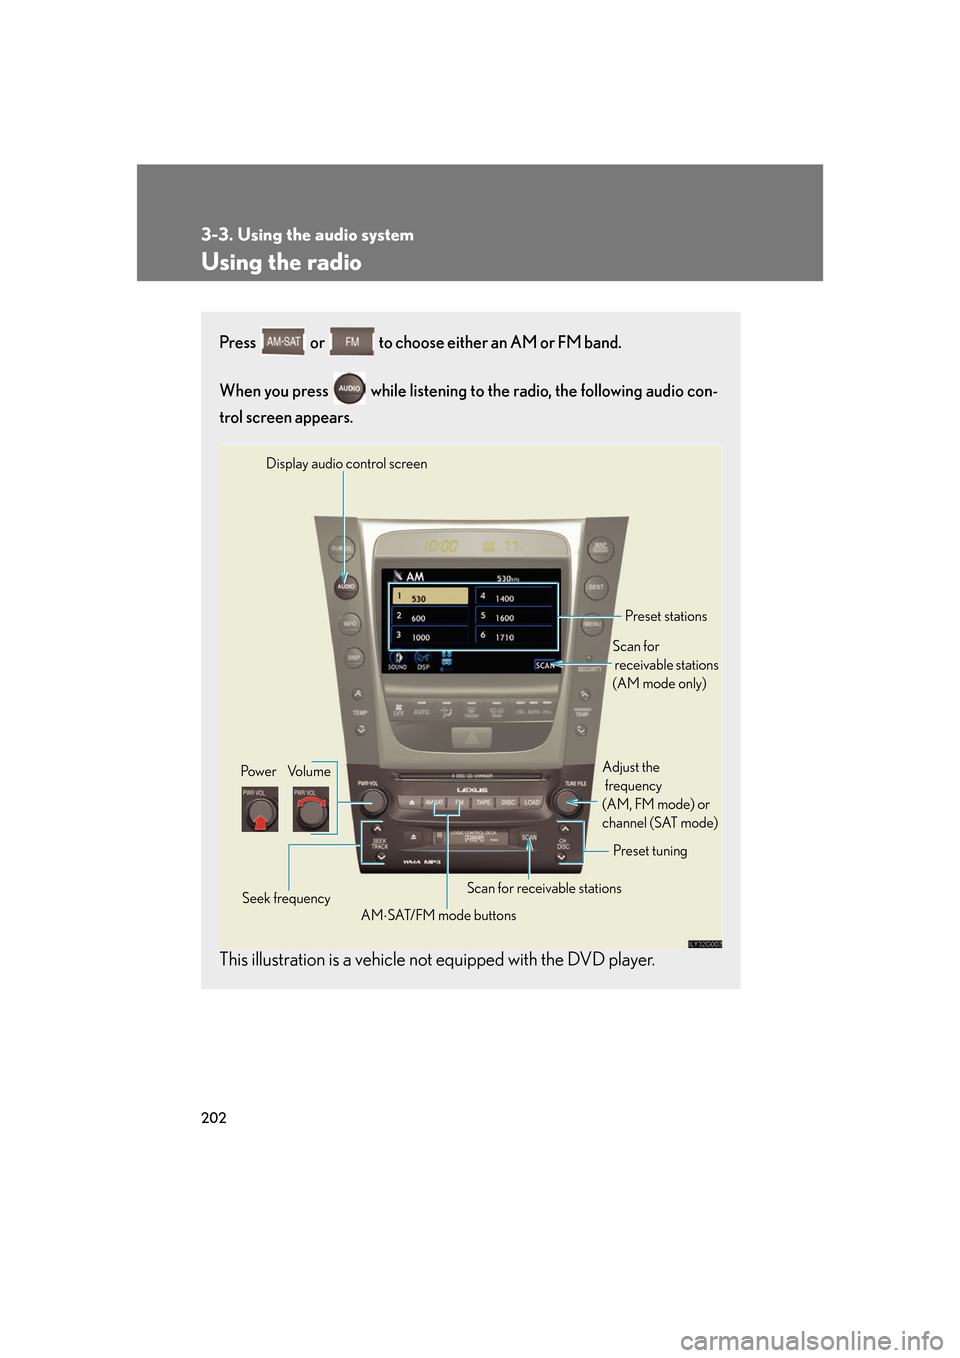 Lexus GS350 2007  Anti-theft system / LEXUS 2007 GS430/350 OWNERS MANUAL (OM30A04U) 202
3-3. Using the audio system
Using the radio
Press  or  to choose either an AM or FM band.
When you press   while listening to the radio, the following audio con -
trol screen appears.
This illustr